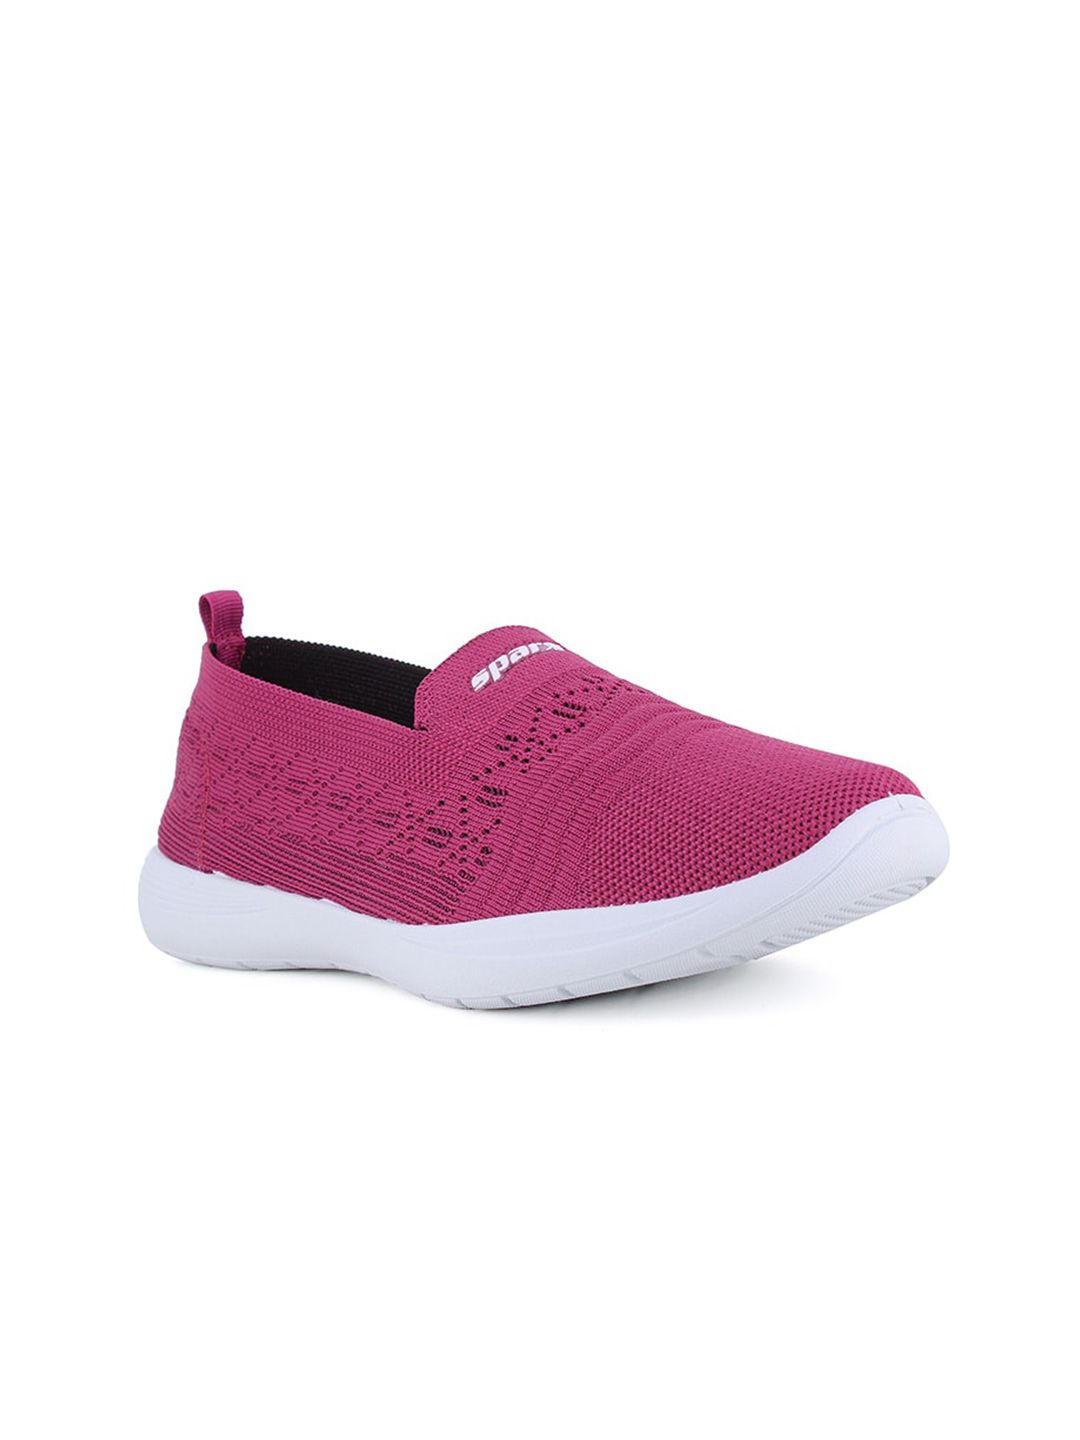 Sparx Women Non-Marking Running Shoes Price in India